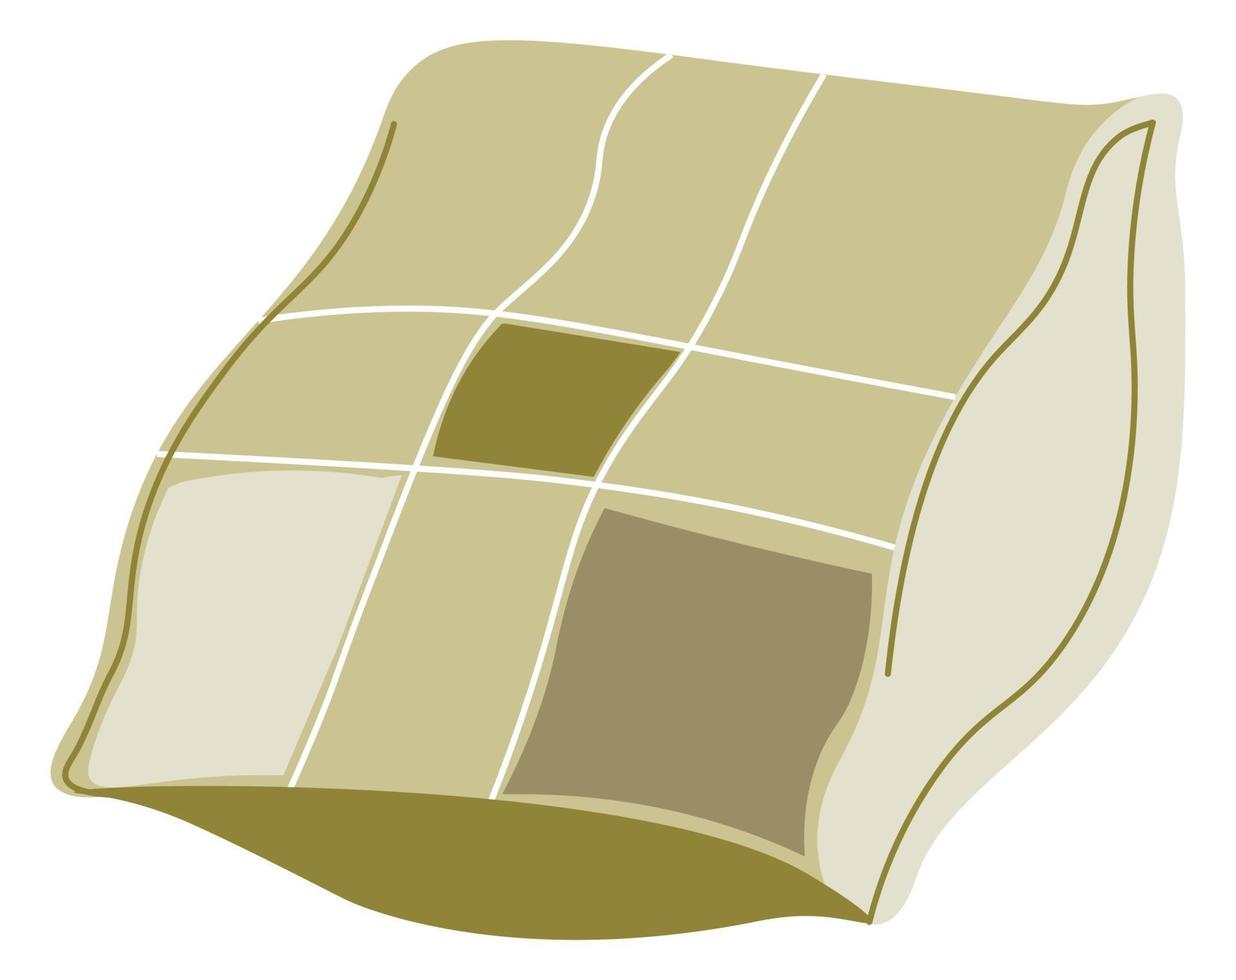 Pillow with square pattern, small cushion design vector